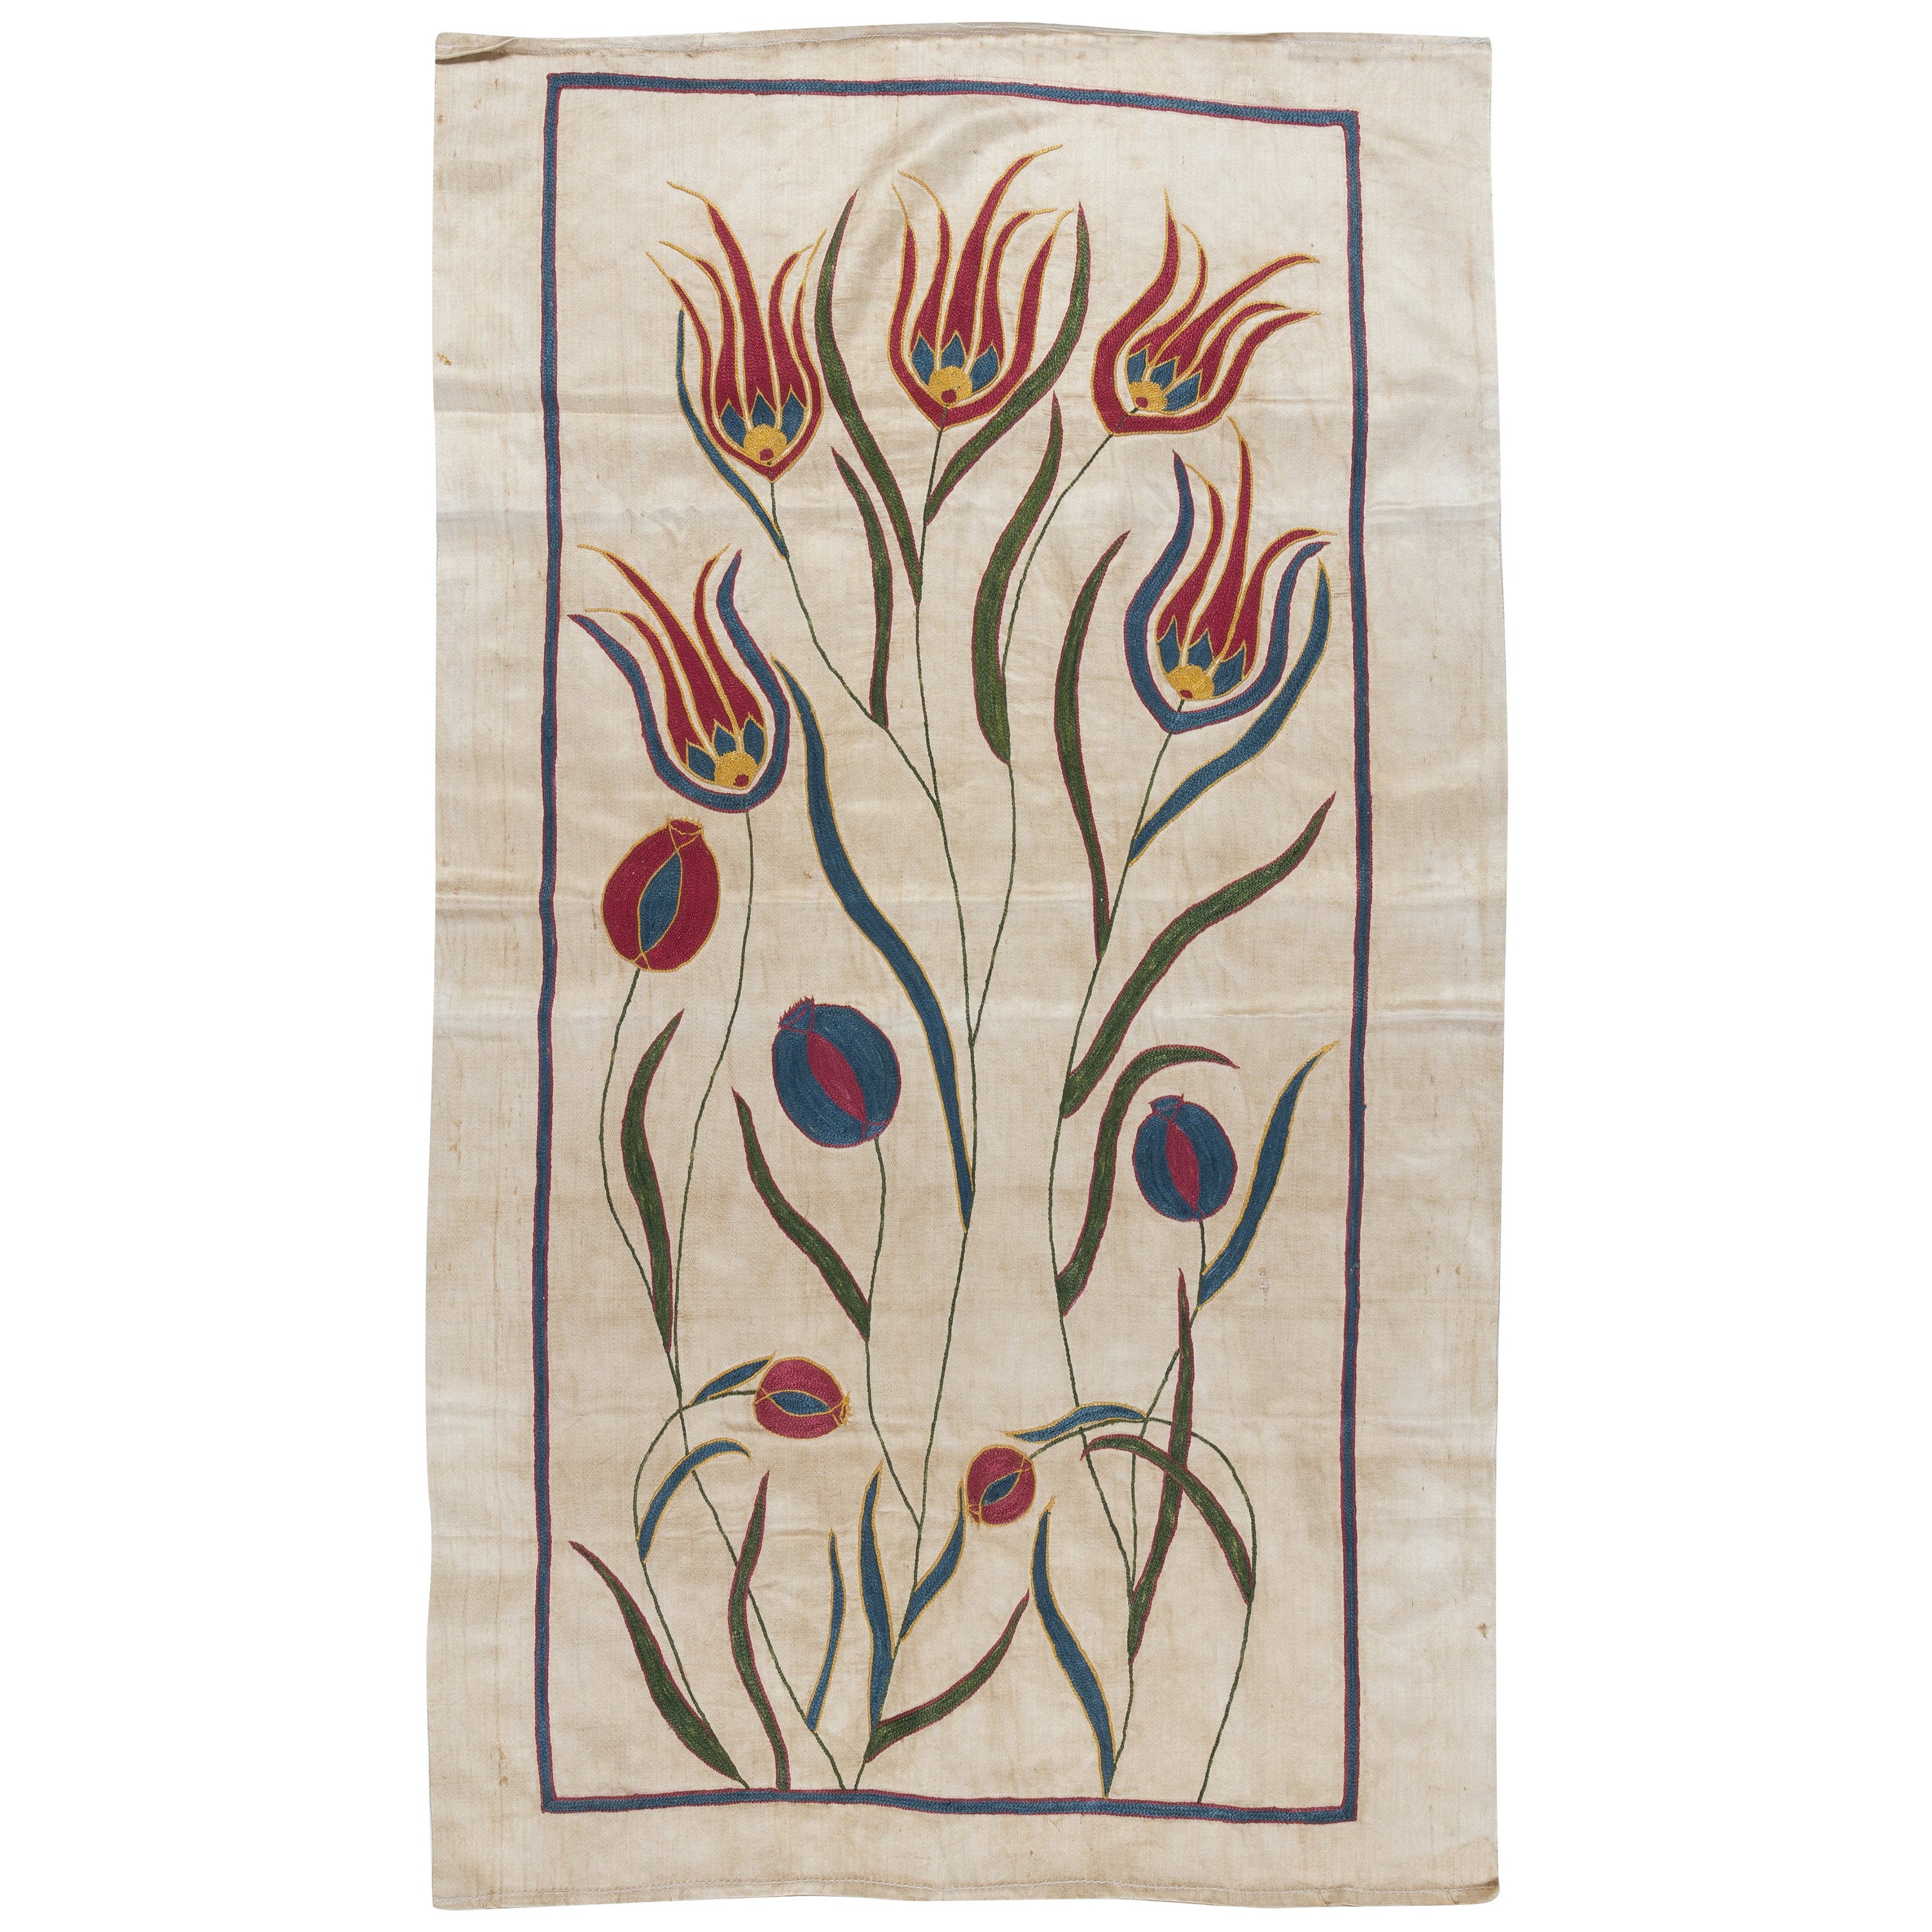 23"x39" Modern 100% Silk Embroidered Suzani Wall Hanging, Uzbek Tablecloth For Sale